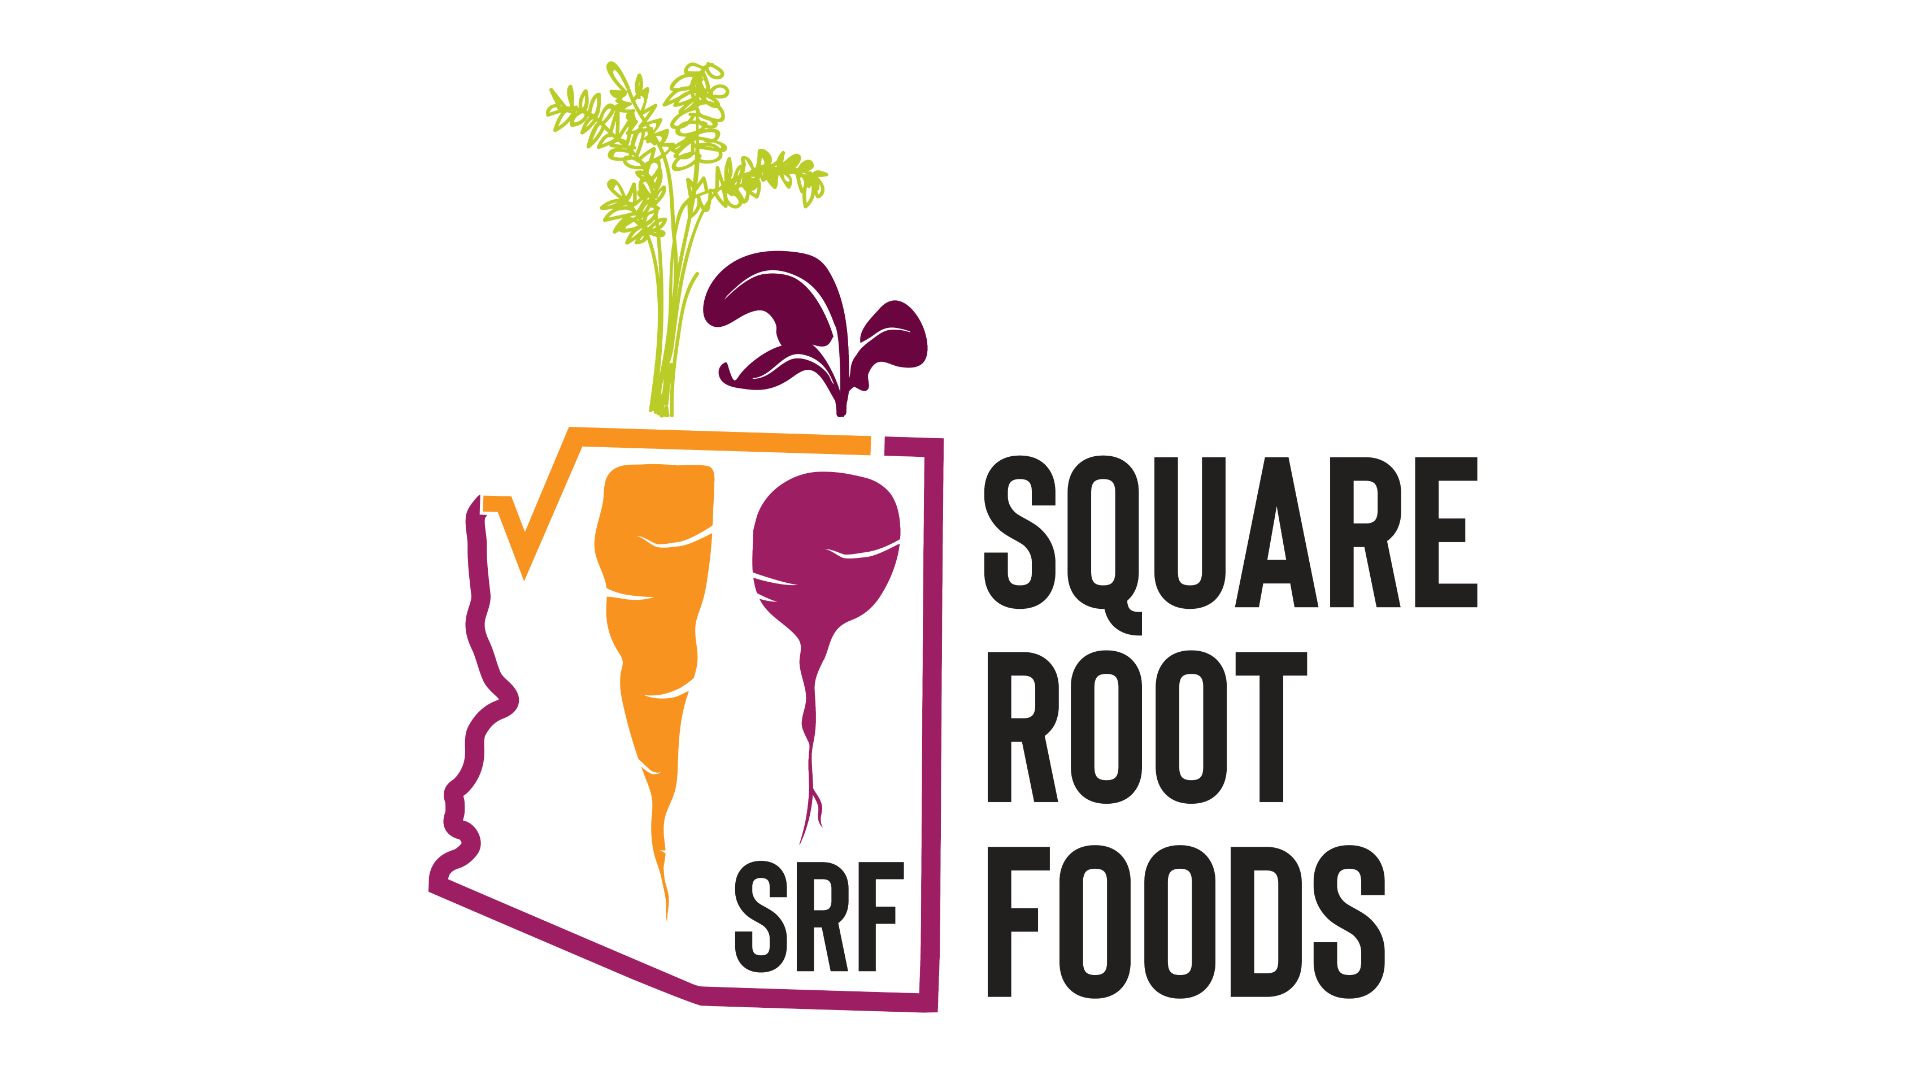 Square Root Foods